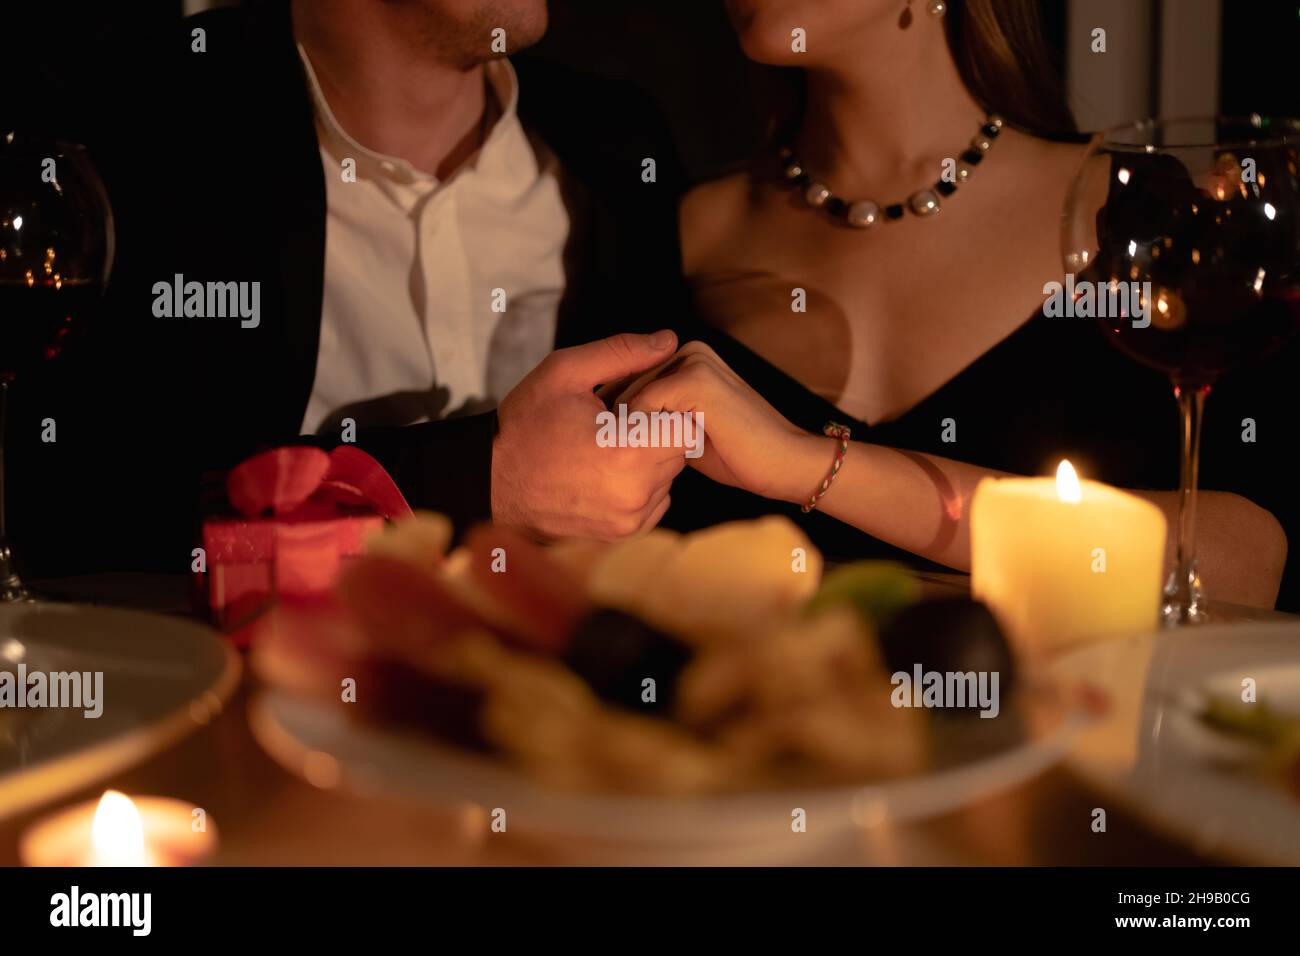 Beautiful passionate couple, romantic candlelight dinner at home, wine in glasses, hold a woman's hand, close-up, Valentine's day celebration Stock Photo